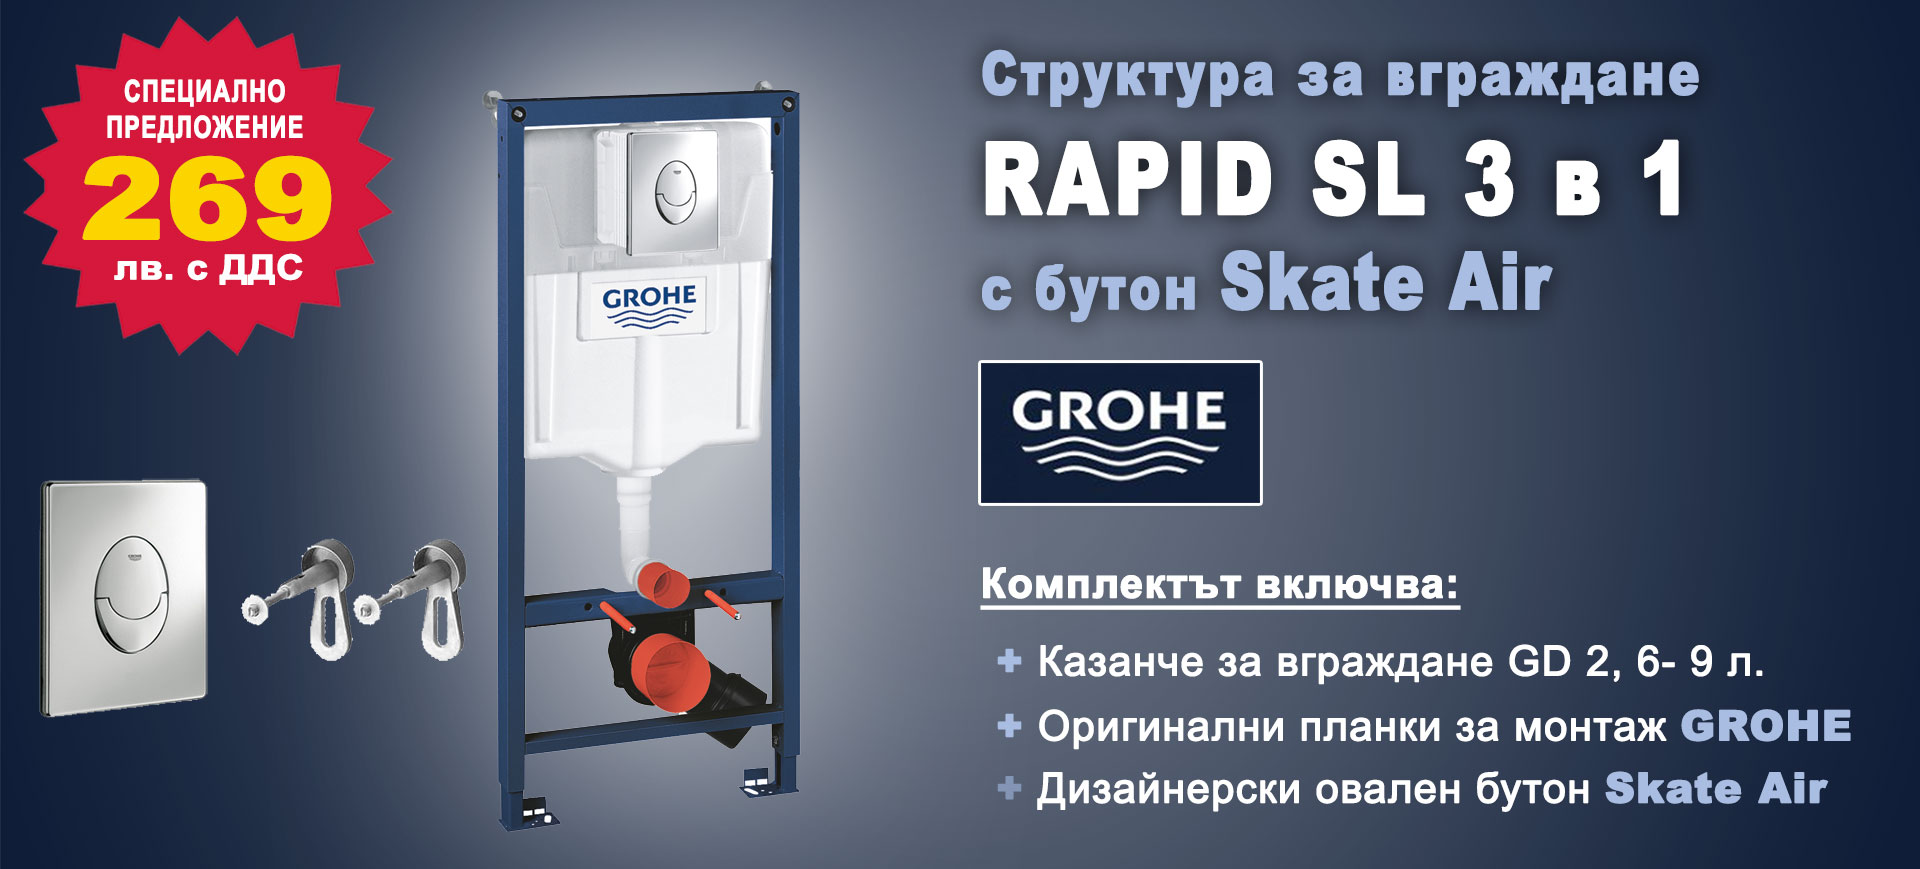 GROHE RAPID SL 3 in 1 built-in set at a special price